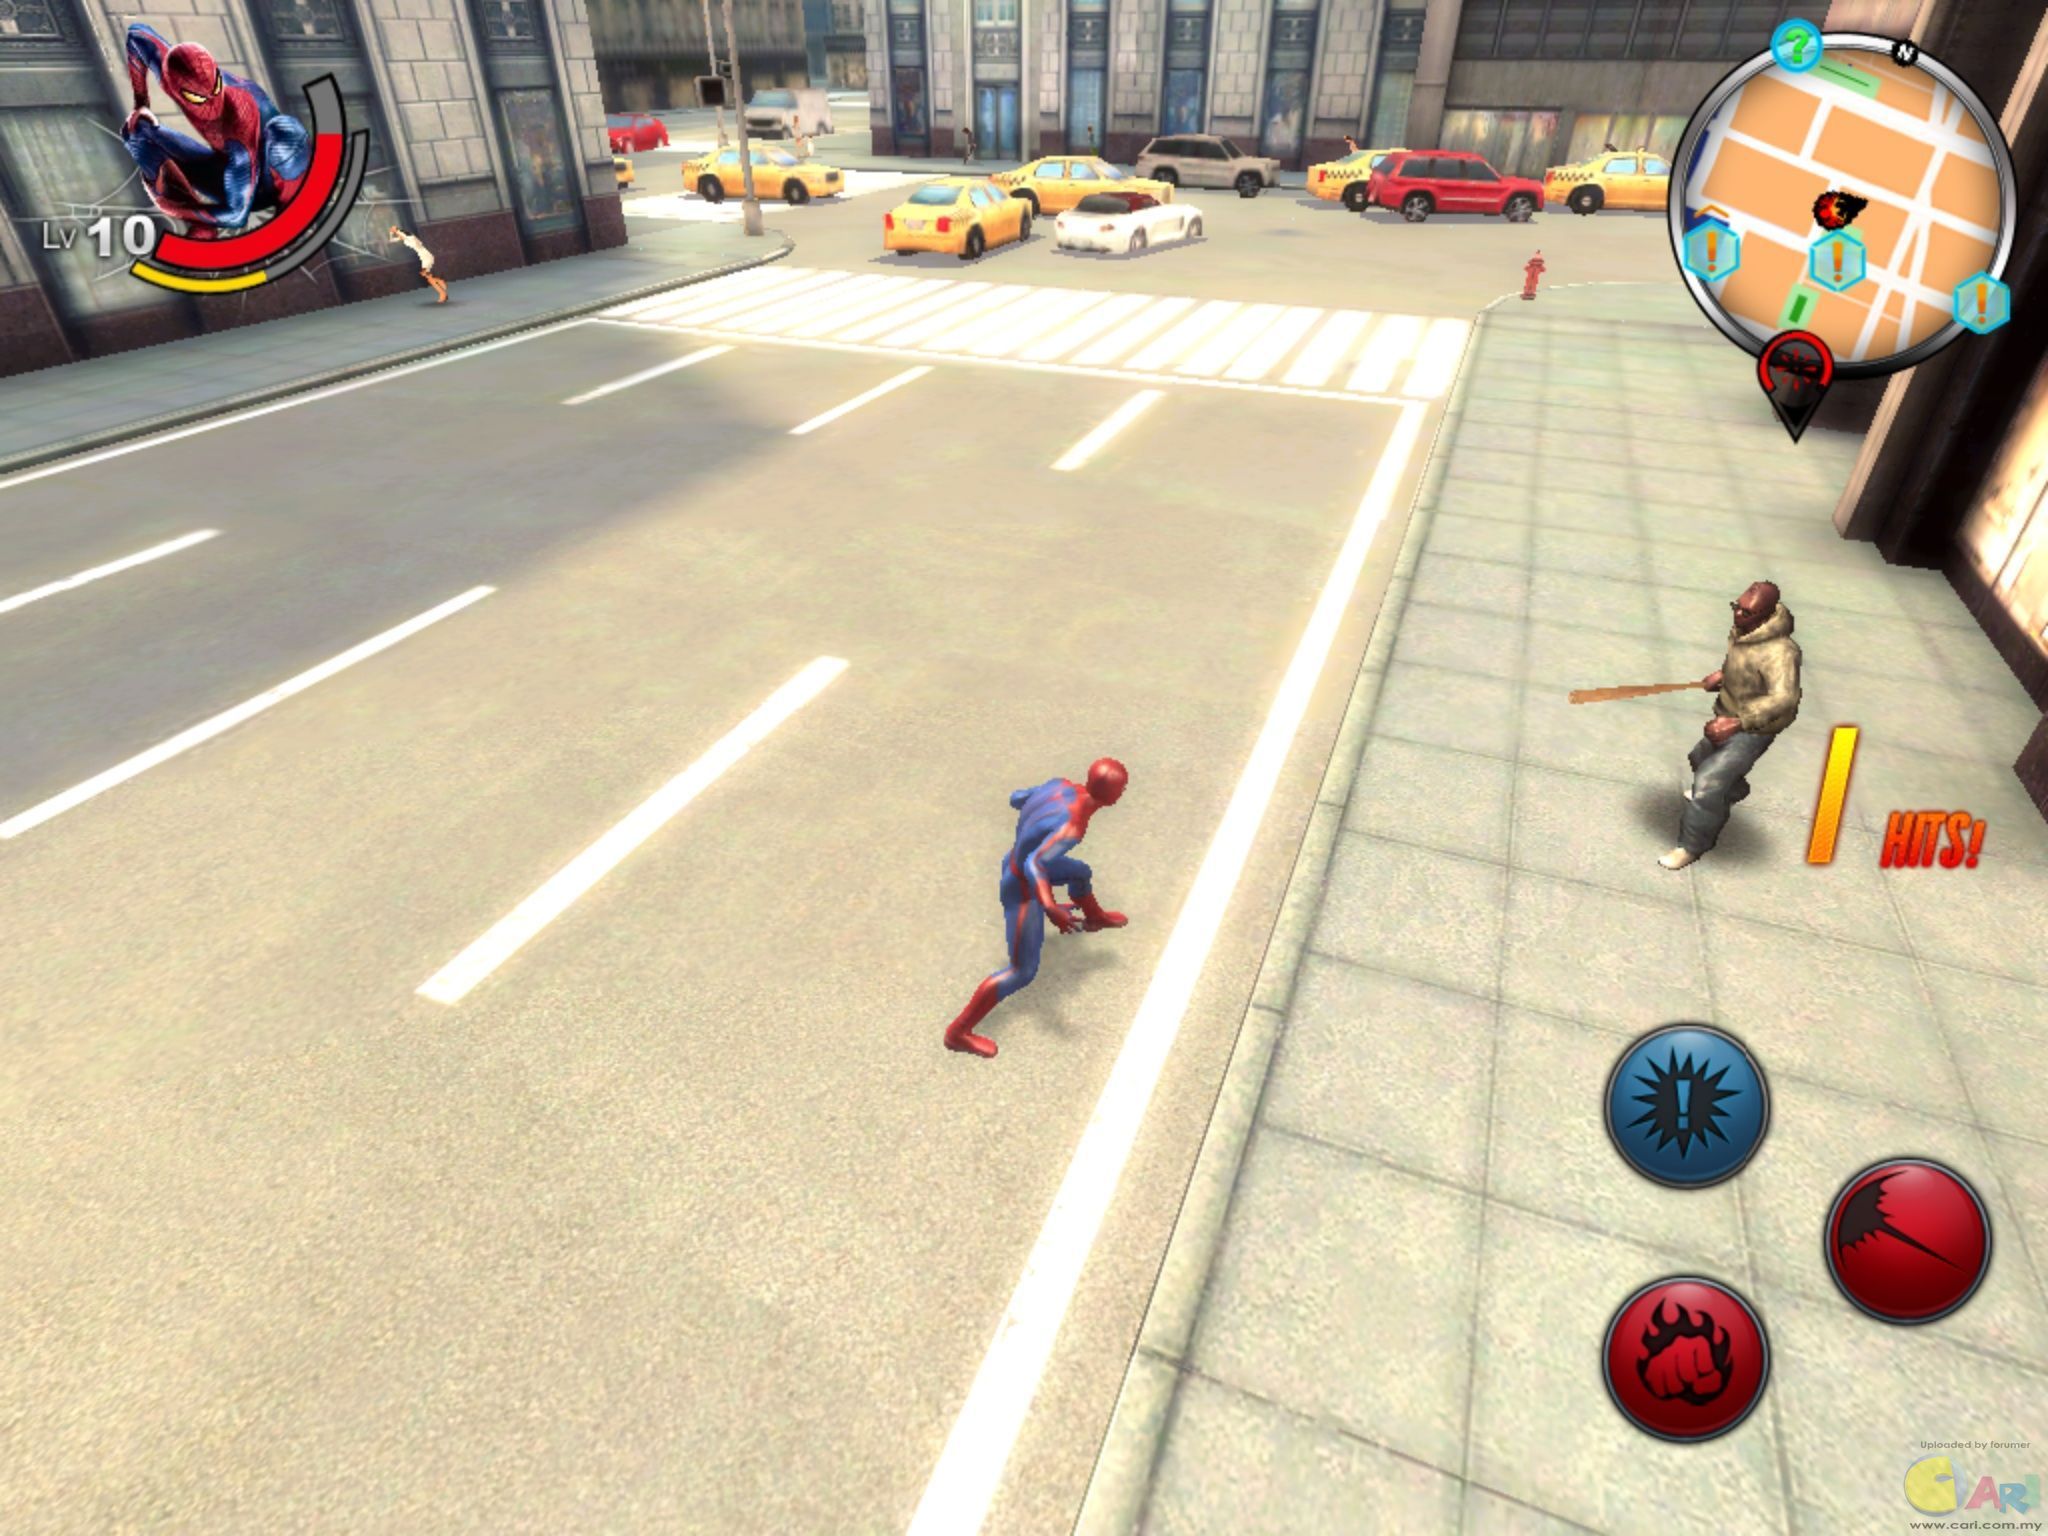 the amazing spider man pc game torrent